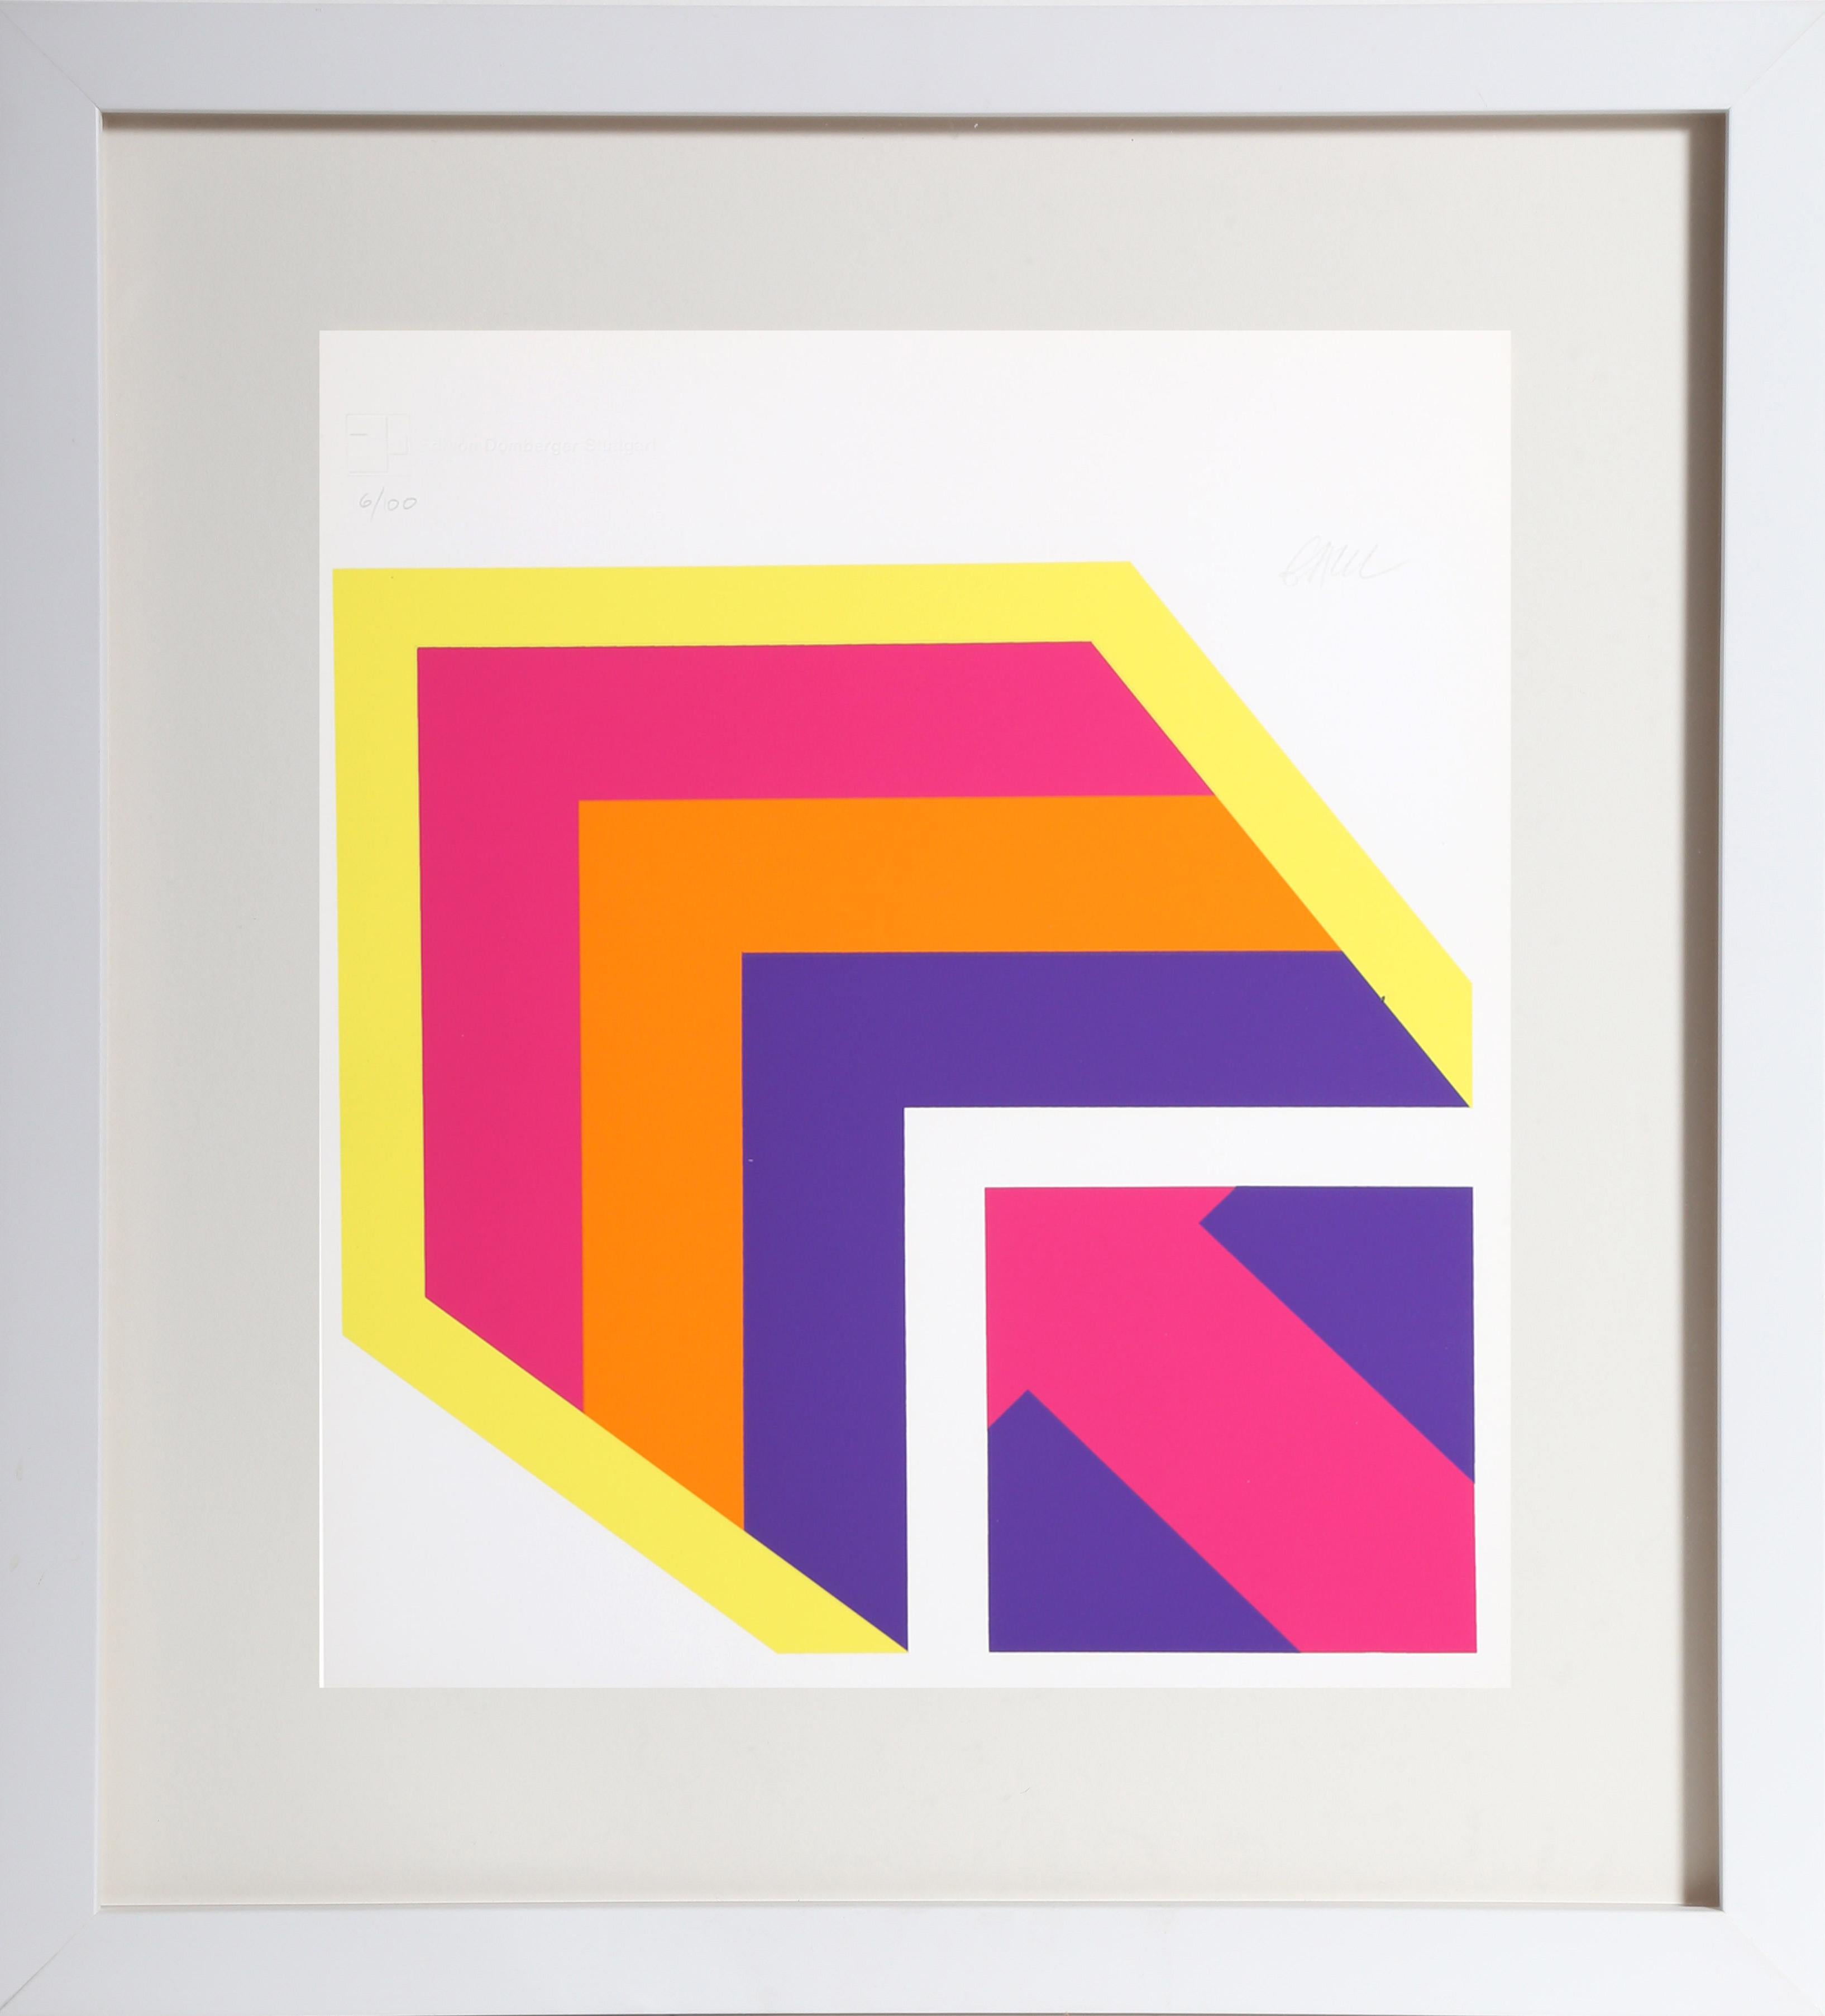 Robert Indiana Abstract Print - May, OP Art Print by Winfred Gaul 1969